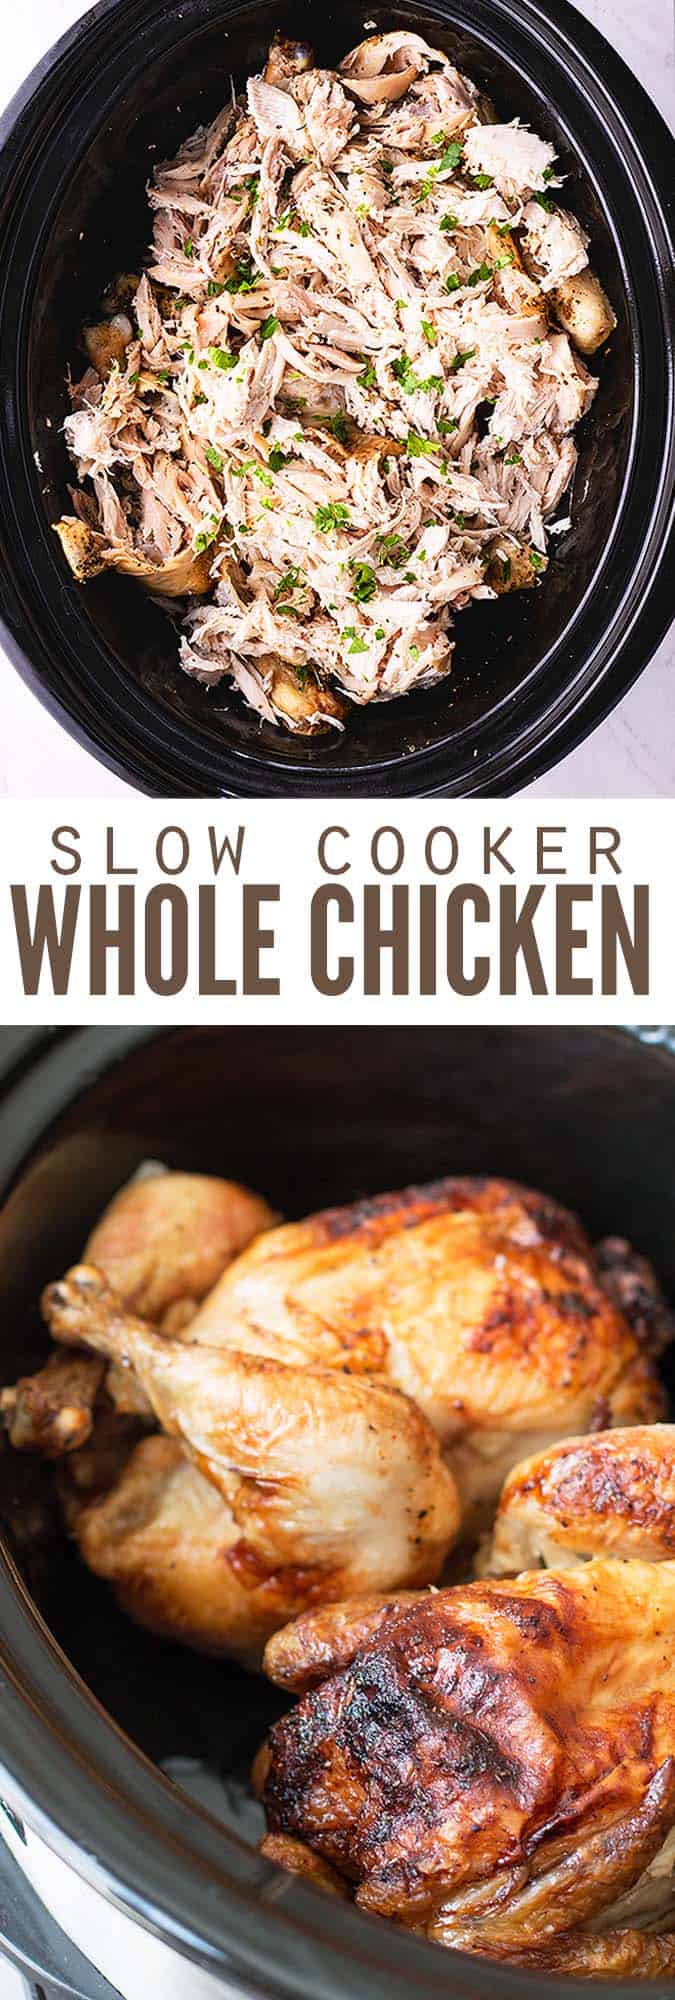 Slow Cooker Chicken Recipe | All-purpose chicken for any recipe